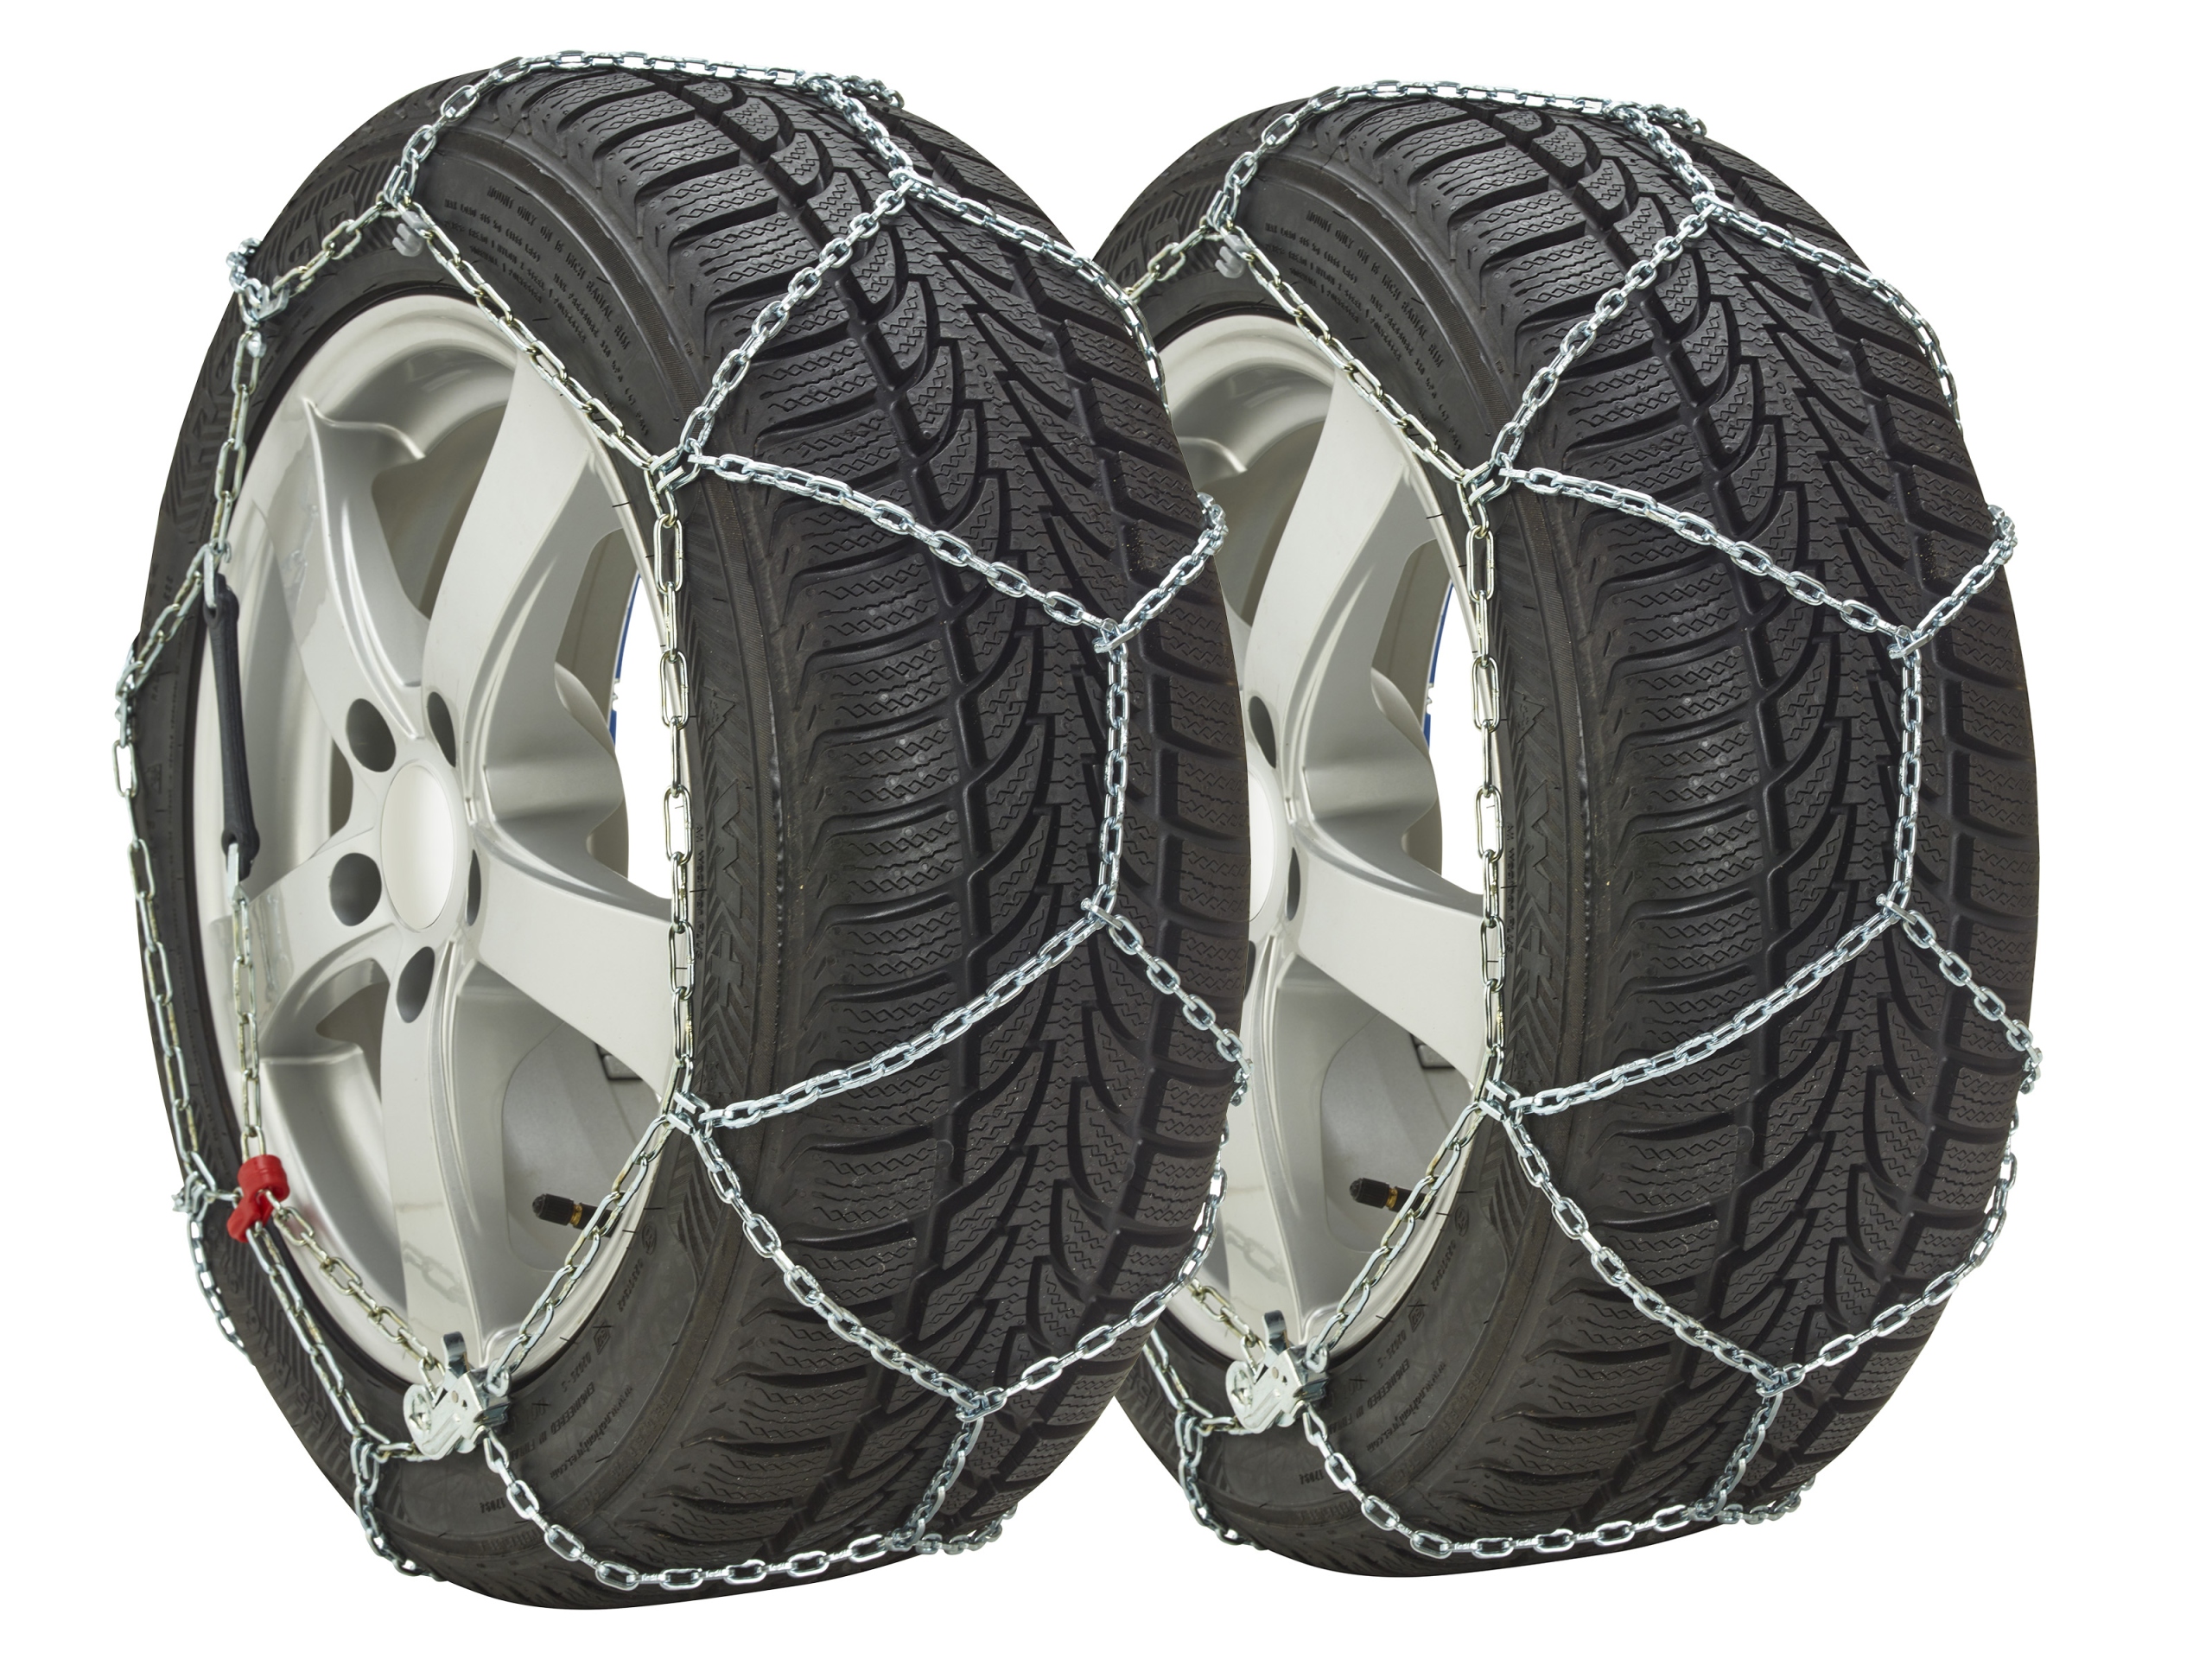  Chaines neige 9mm ECO 120-215 60 R17, 255 40 R18, 235 40 R19, 195  55 R20 et +